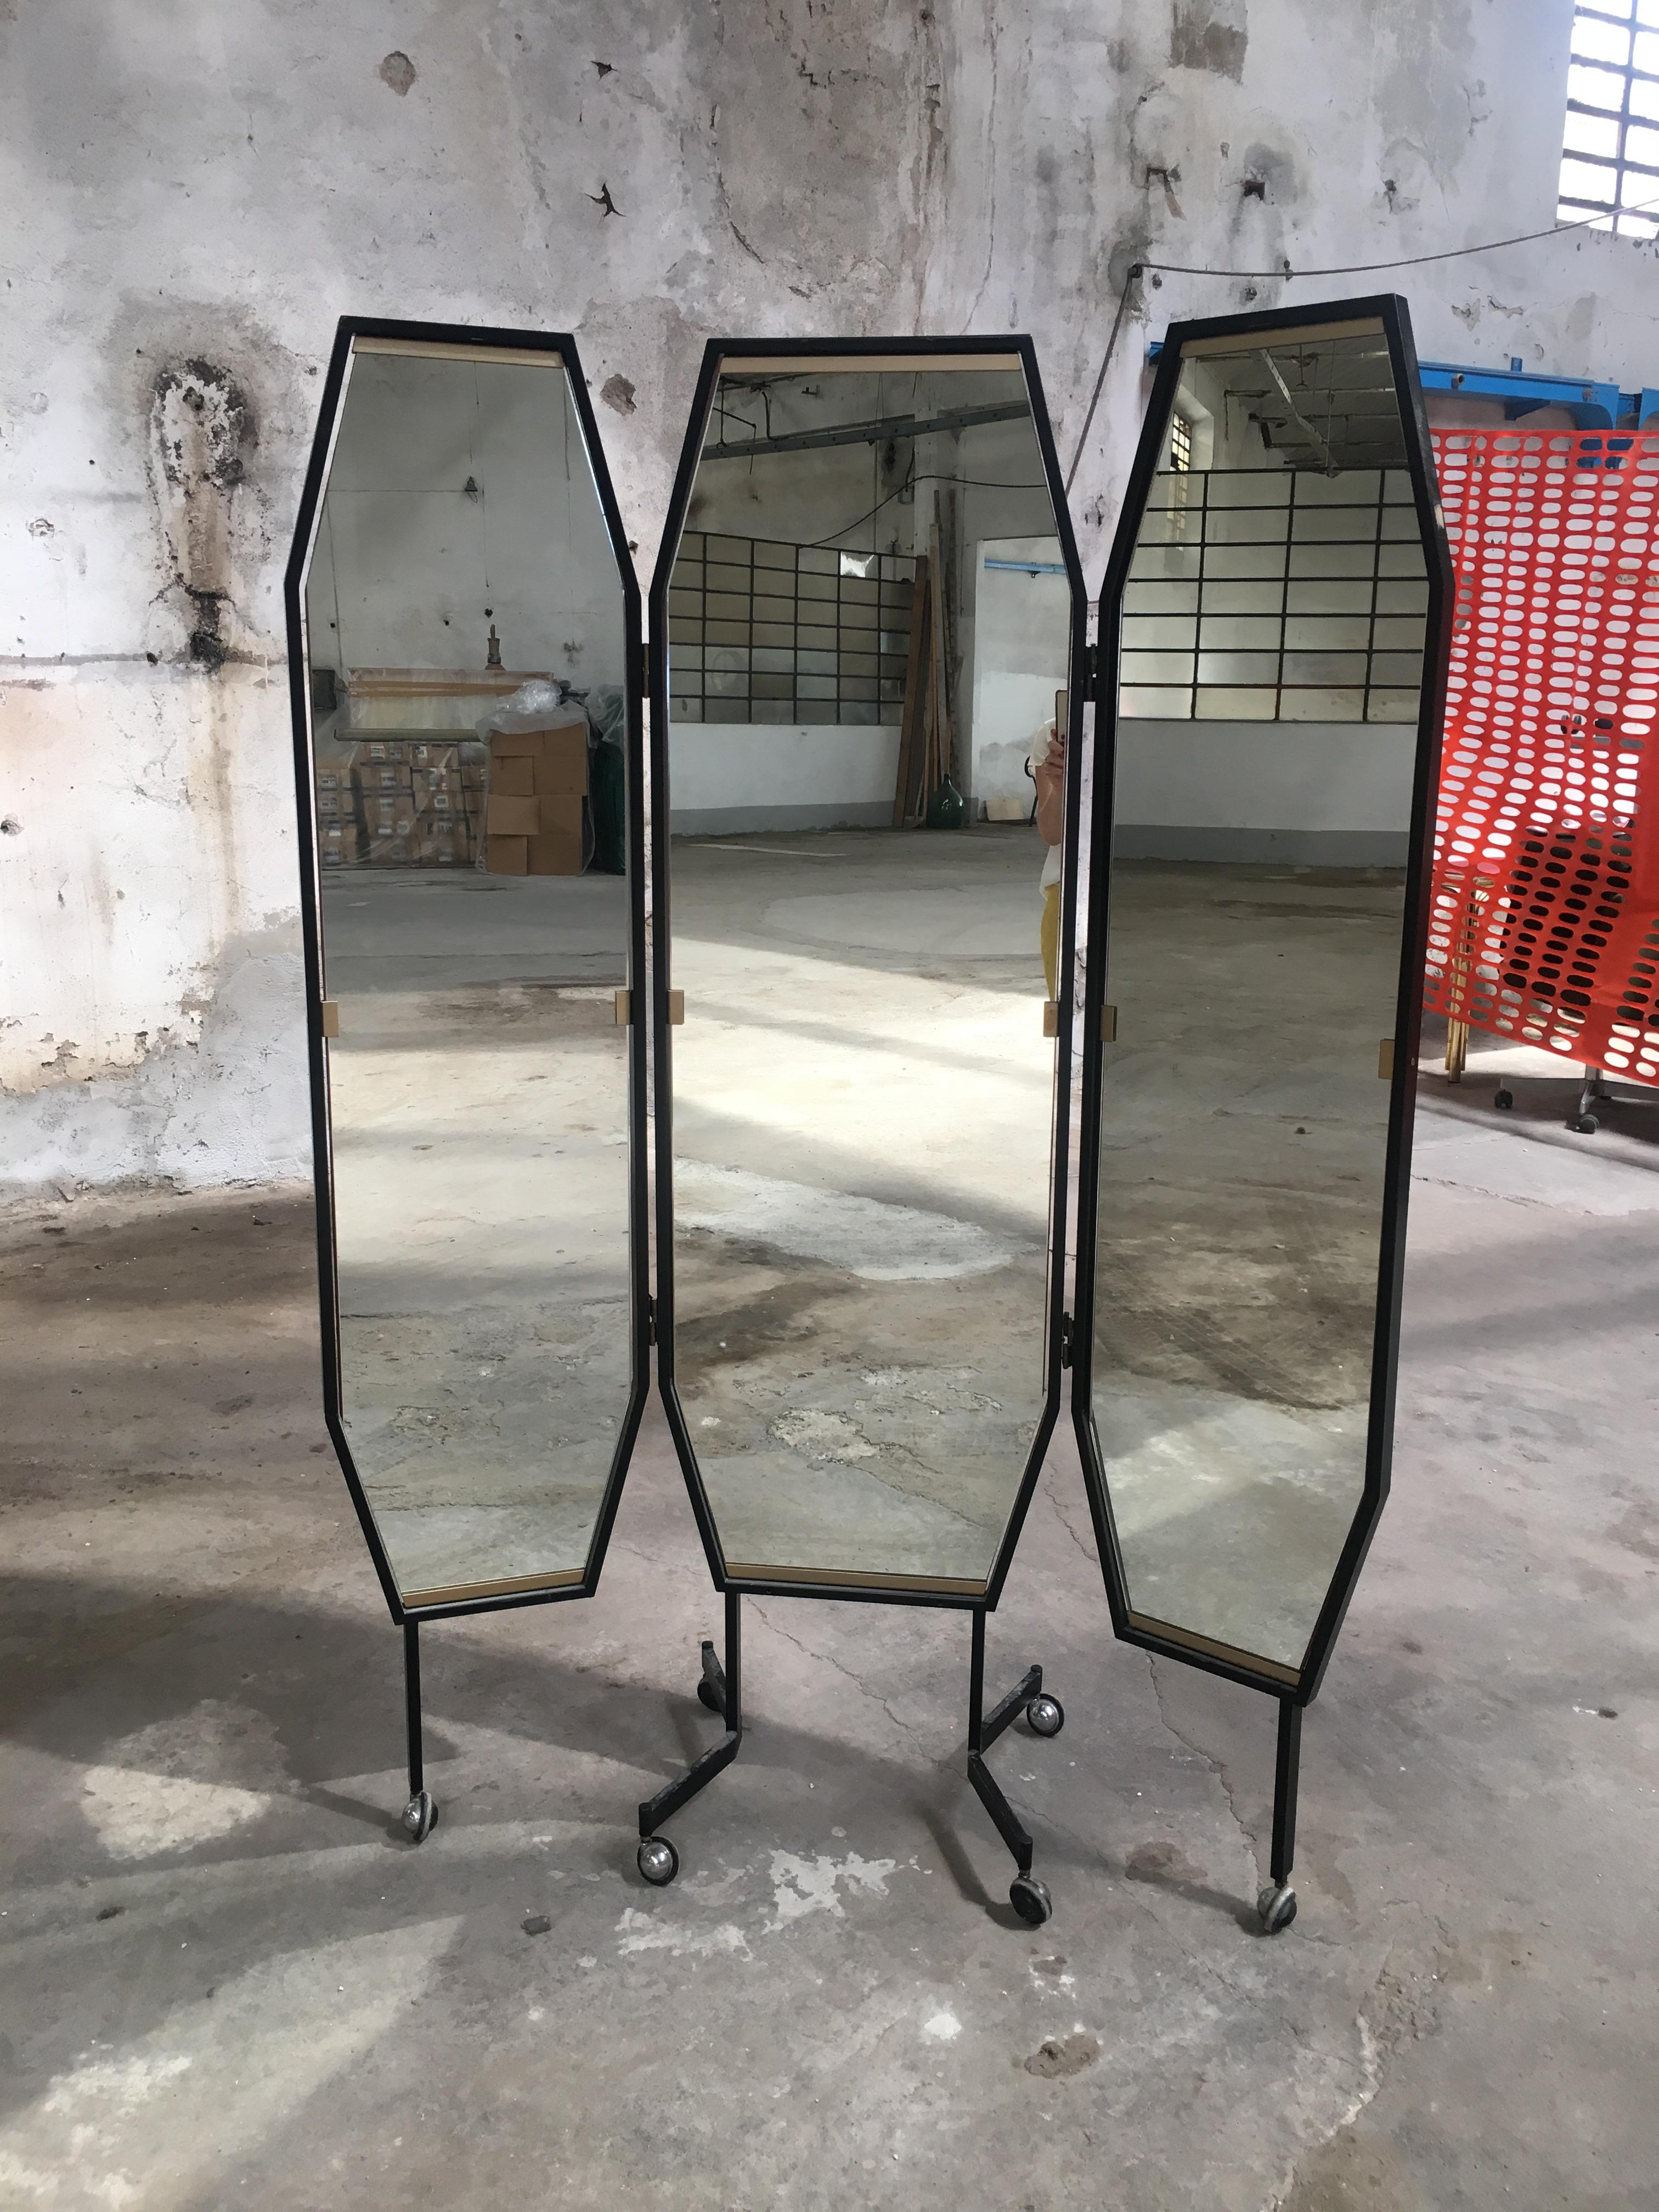 Italian triptych freestanding dressing mirror on wheels by Vetraria Bruno
Measures:
Central panel cm 50 x 3 x H 176
Lateral panels cm 38 x 3 x H 176 each.
   